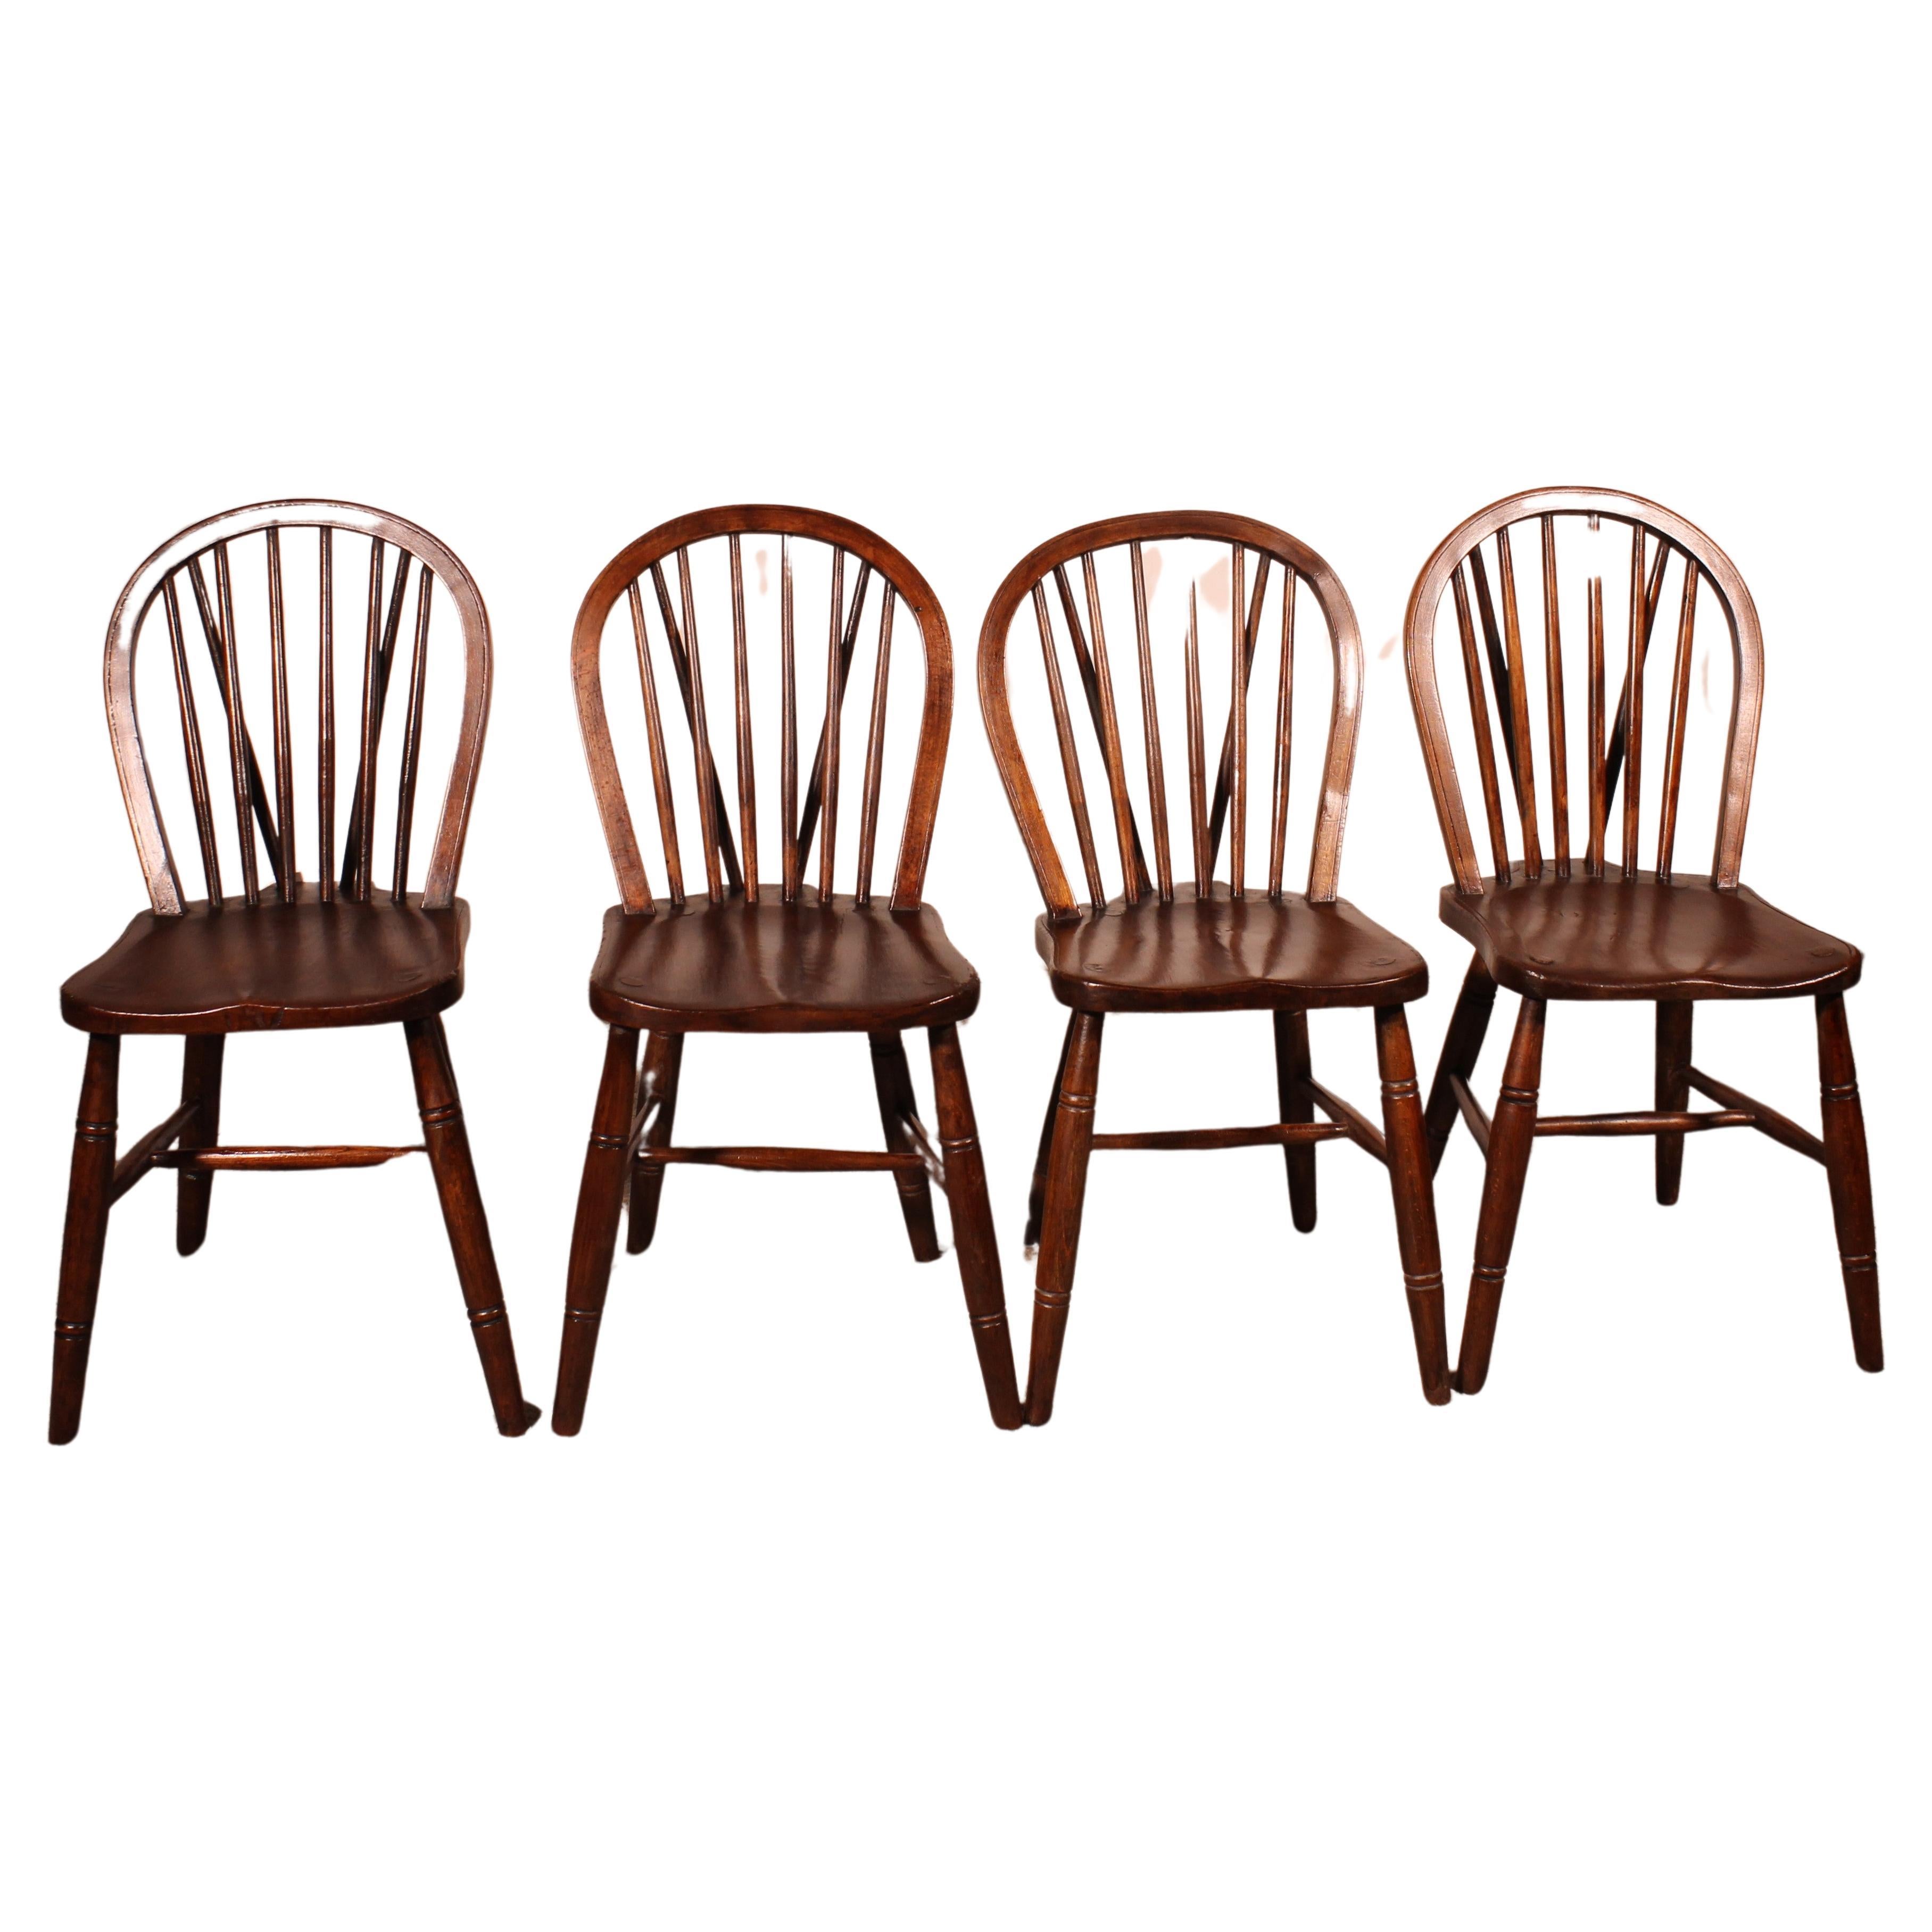 Set Of 4 Windsor Chairs From The 19th Century For Sale